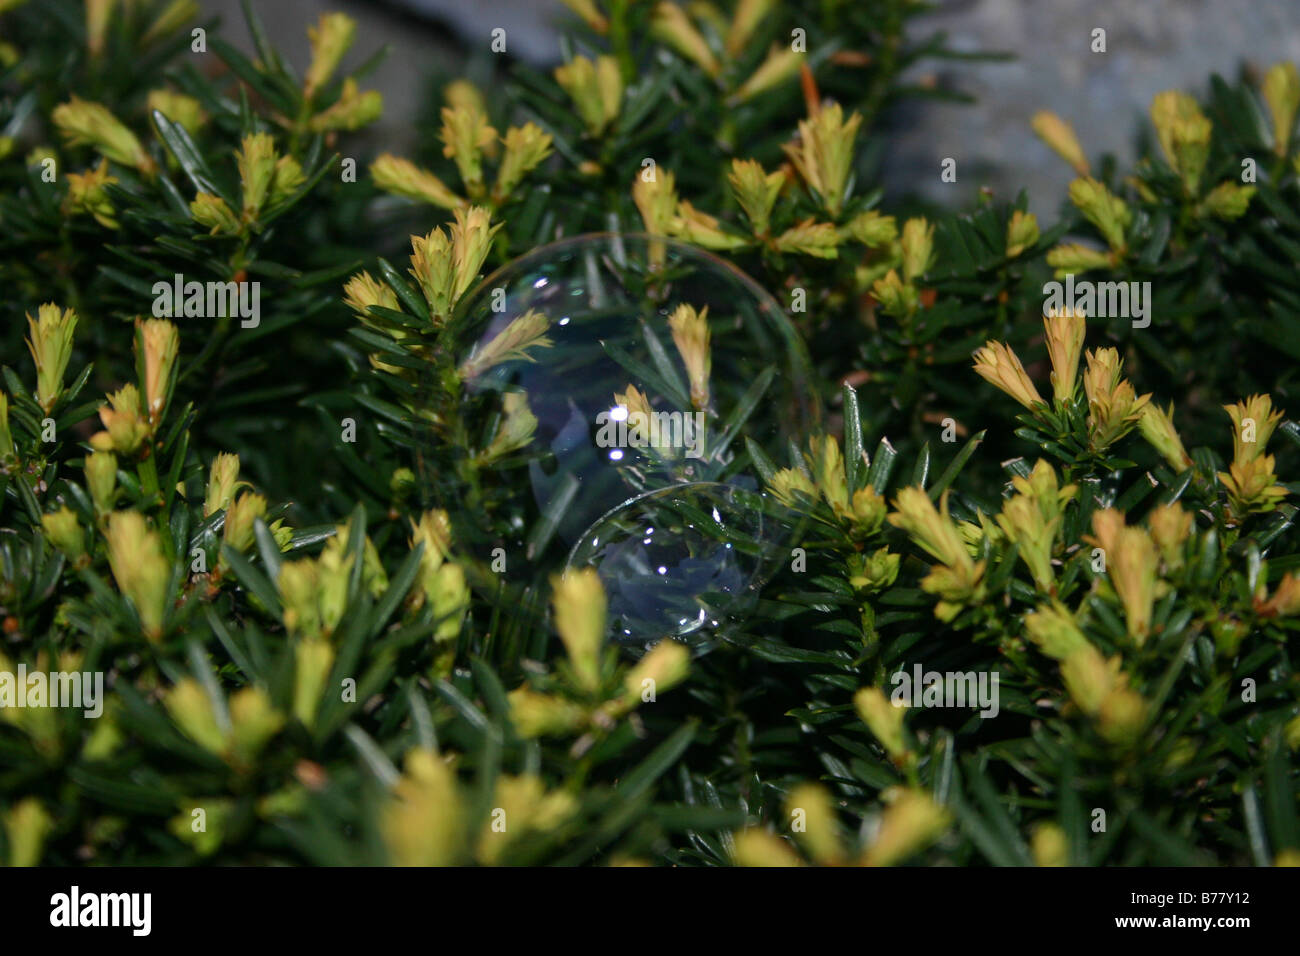 A close-up of a soap bubble that has landed on a yew bush. Stock Photo